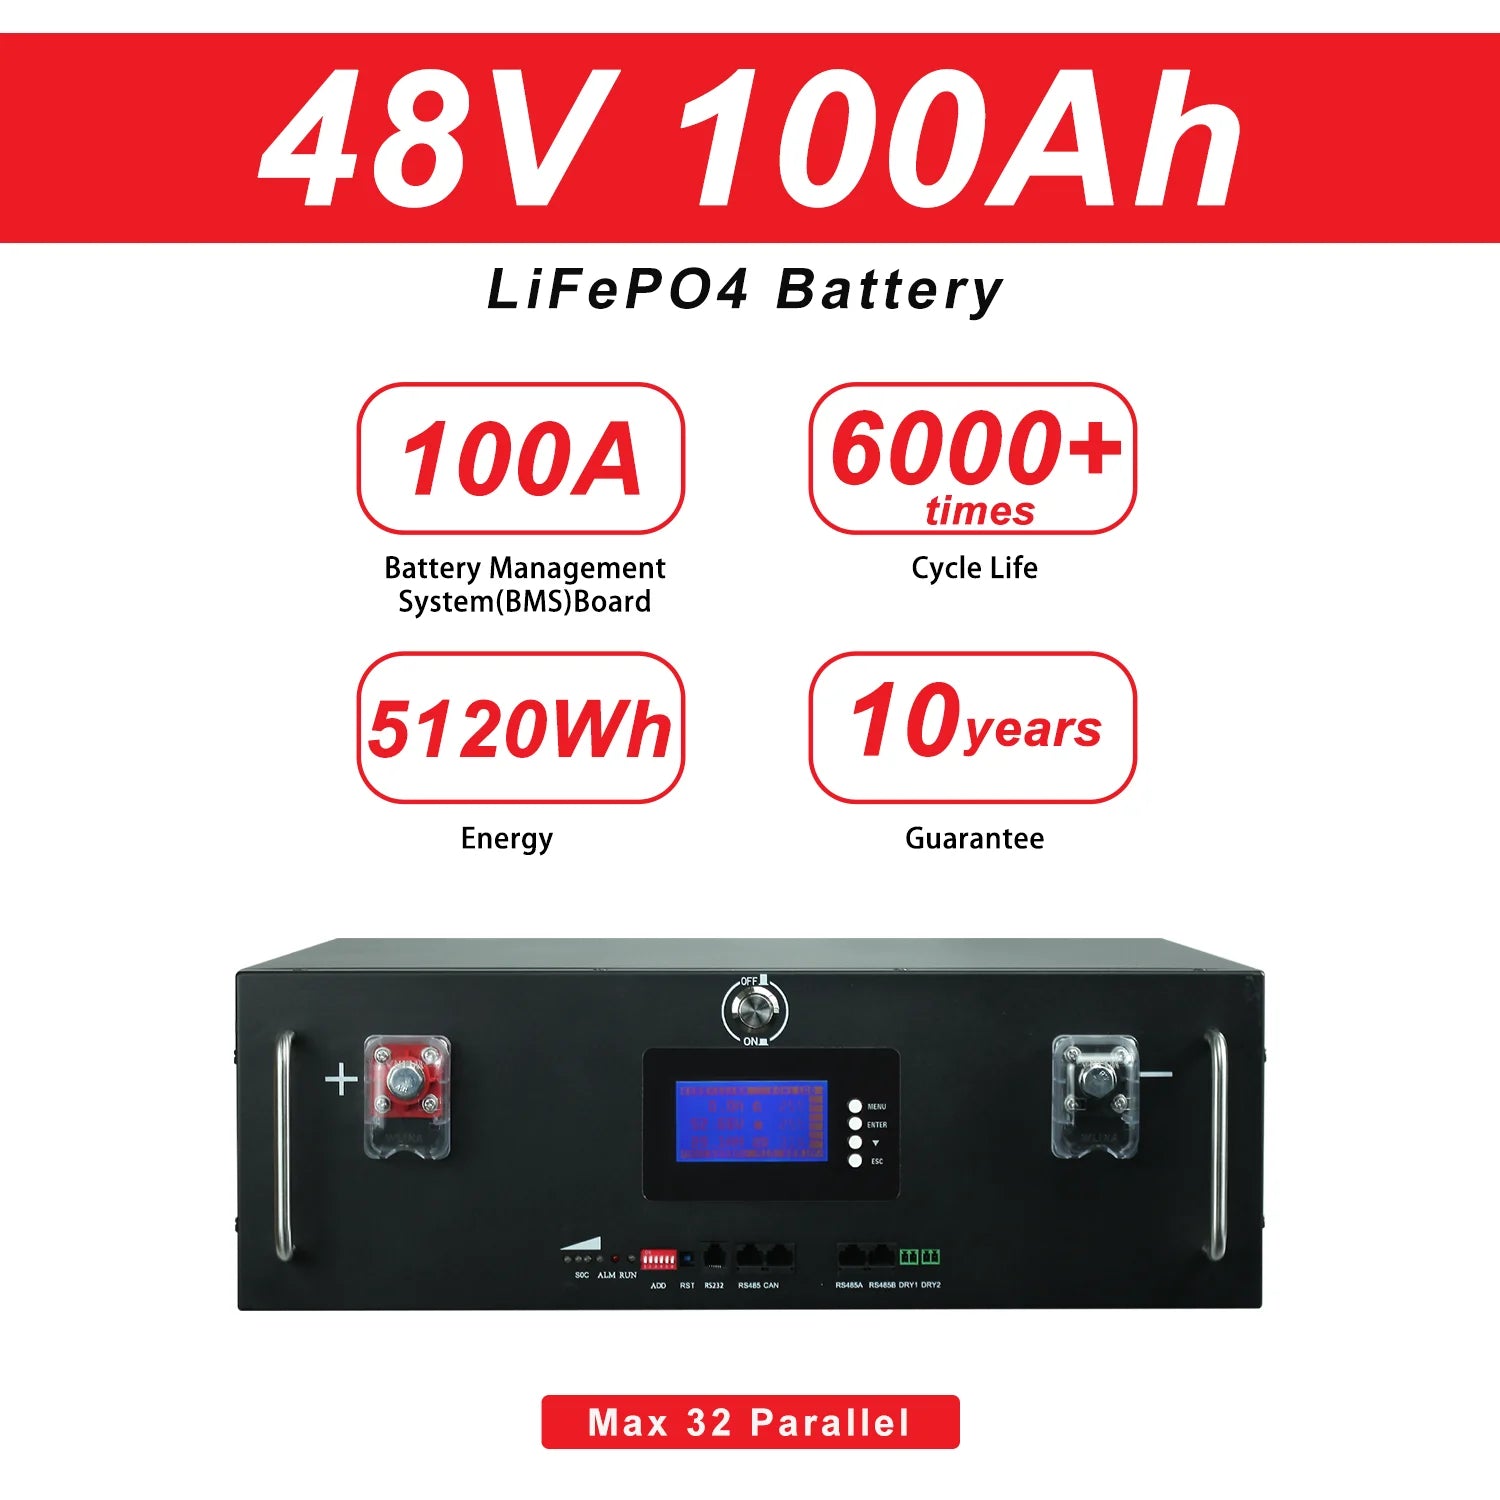 48V 100Ah 200Ah Lifepo4 Battery, High-capacity lithium-ion battery pack with built-in management system, suitable for large-scale energy storage applications.